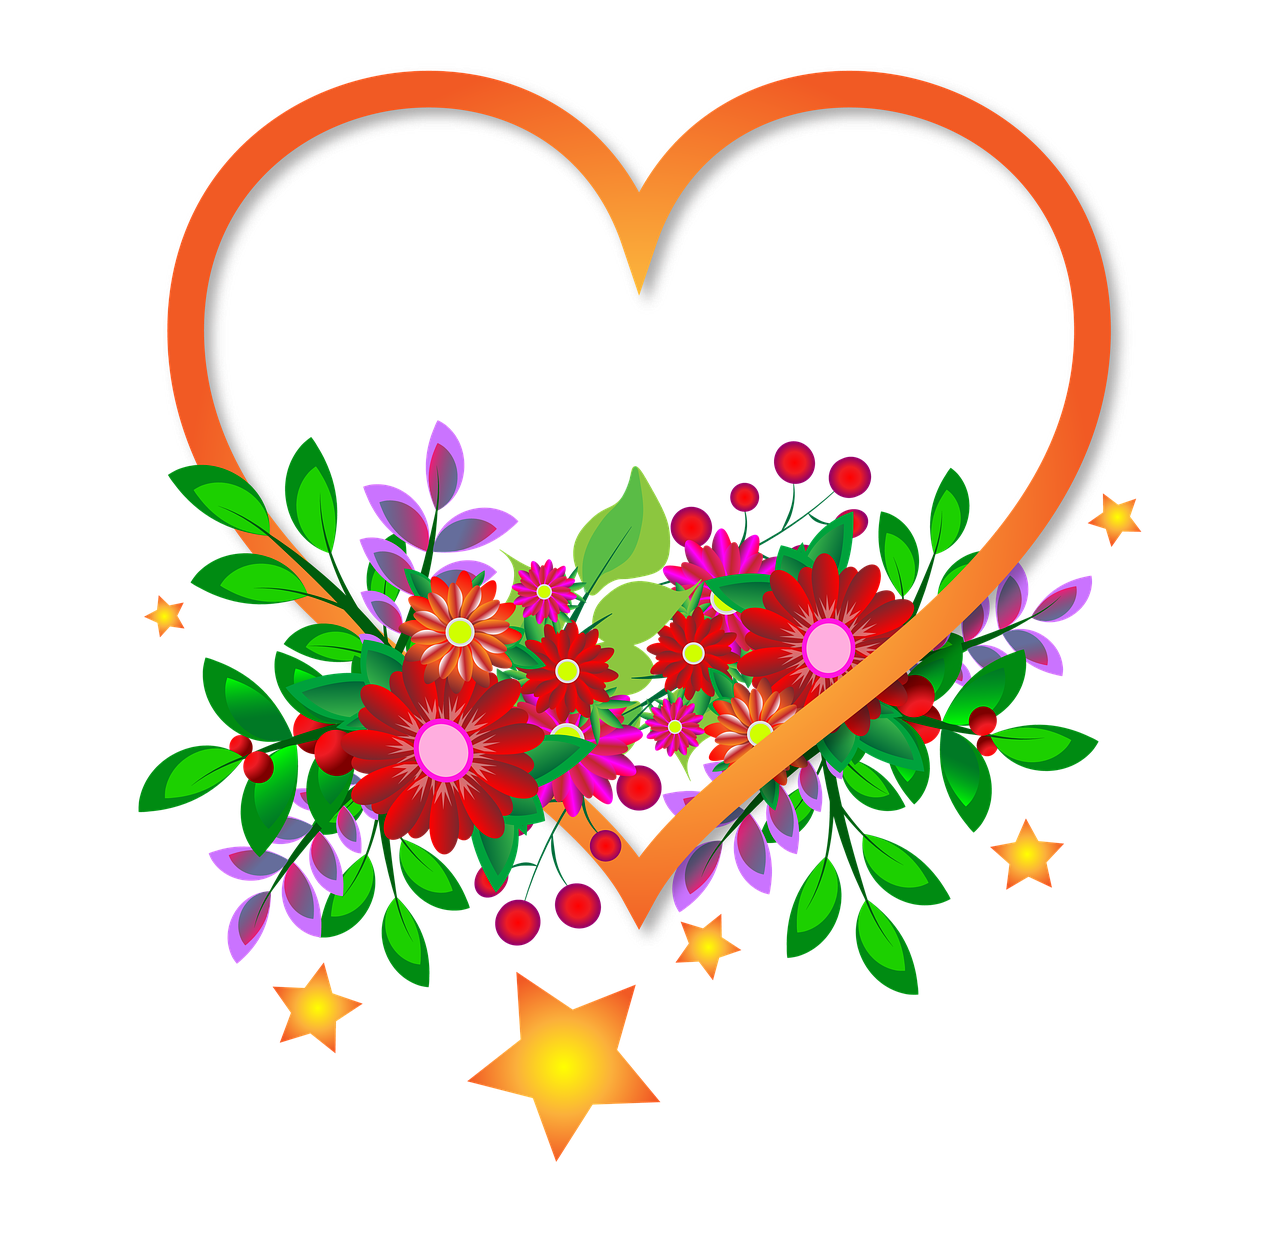 a heart with flowers and stars on a black background, seasons!! : 🌸 ☀ 🍂 ❄, computer - generated, with colorful flowers and plants, stylized border